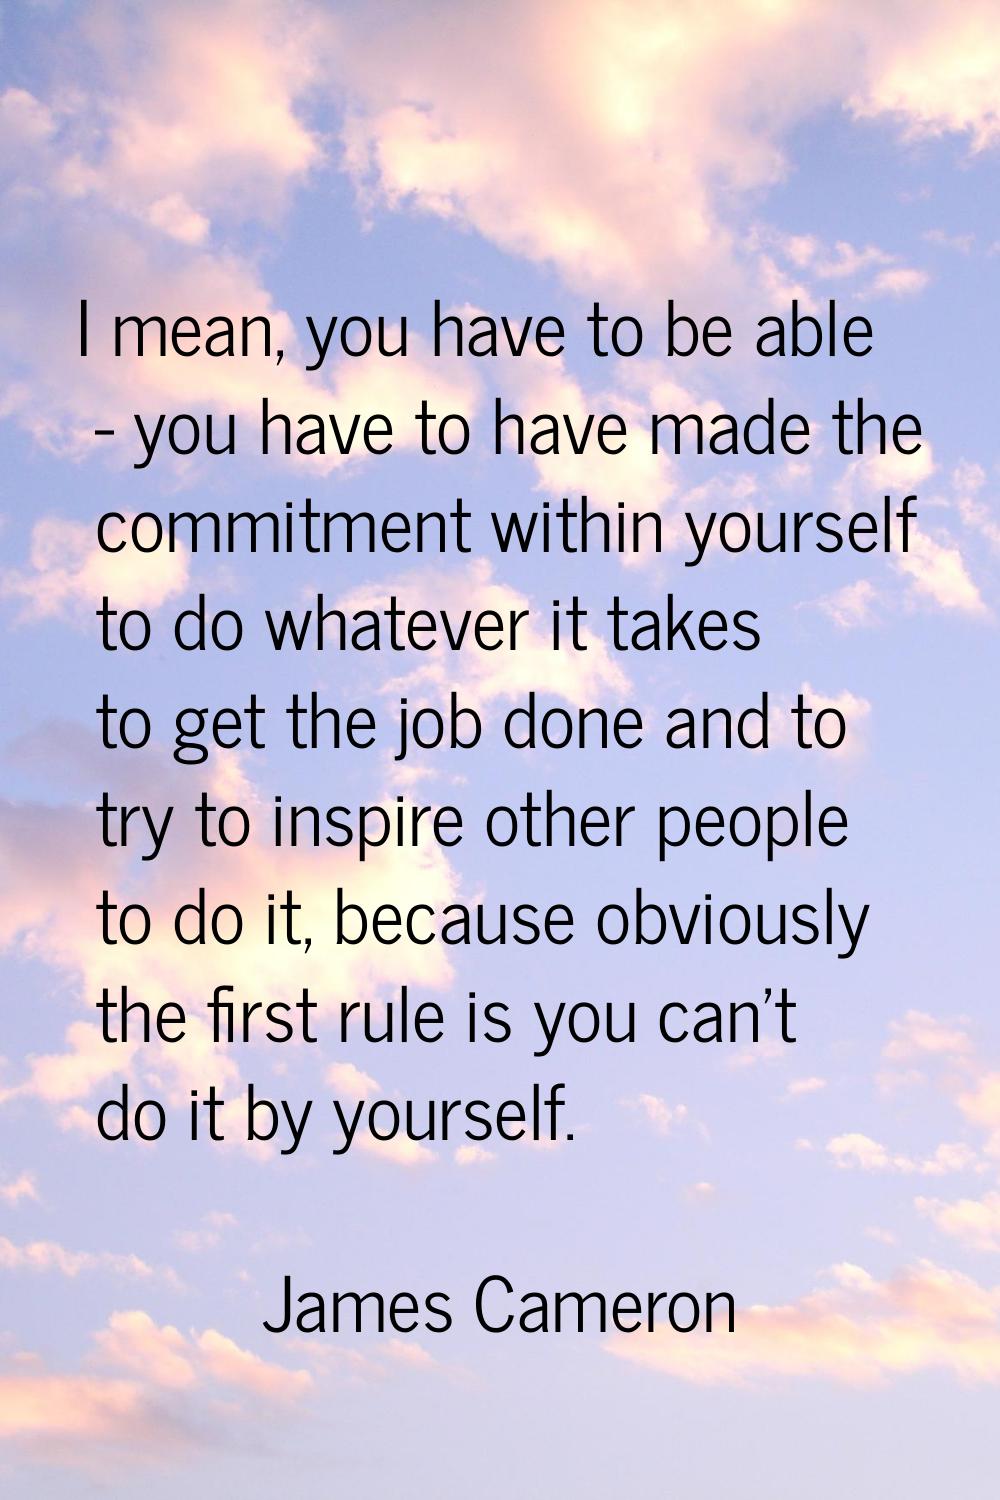 I mean, you have to be able - you have to have made the commitment within yourself to do whatever i